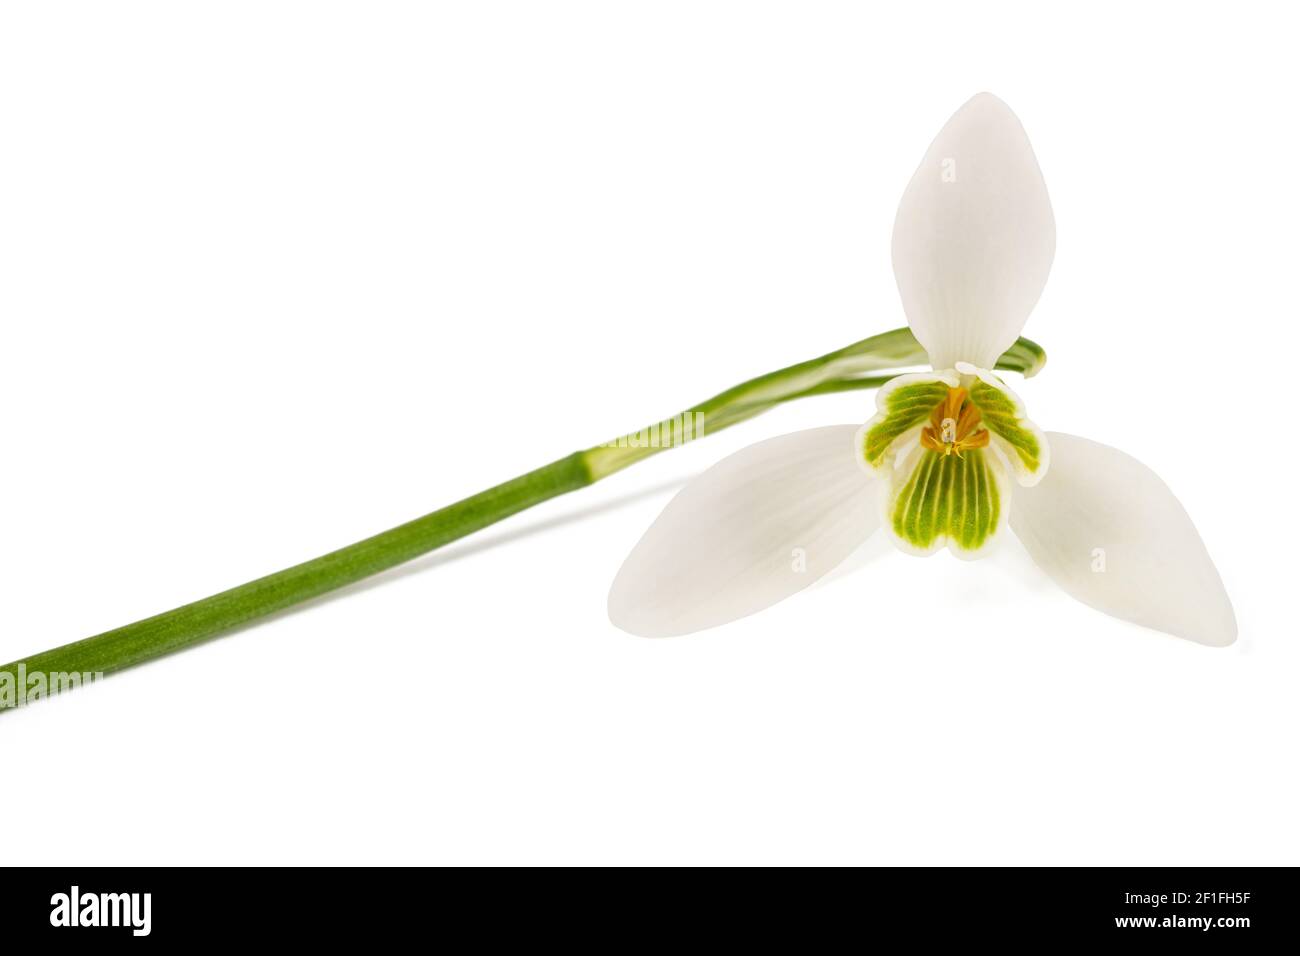 Snowdrop flower isolated on white background Stock Photo